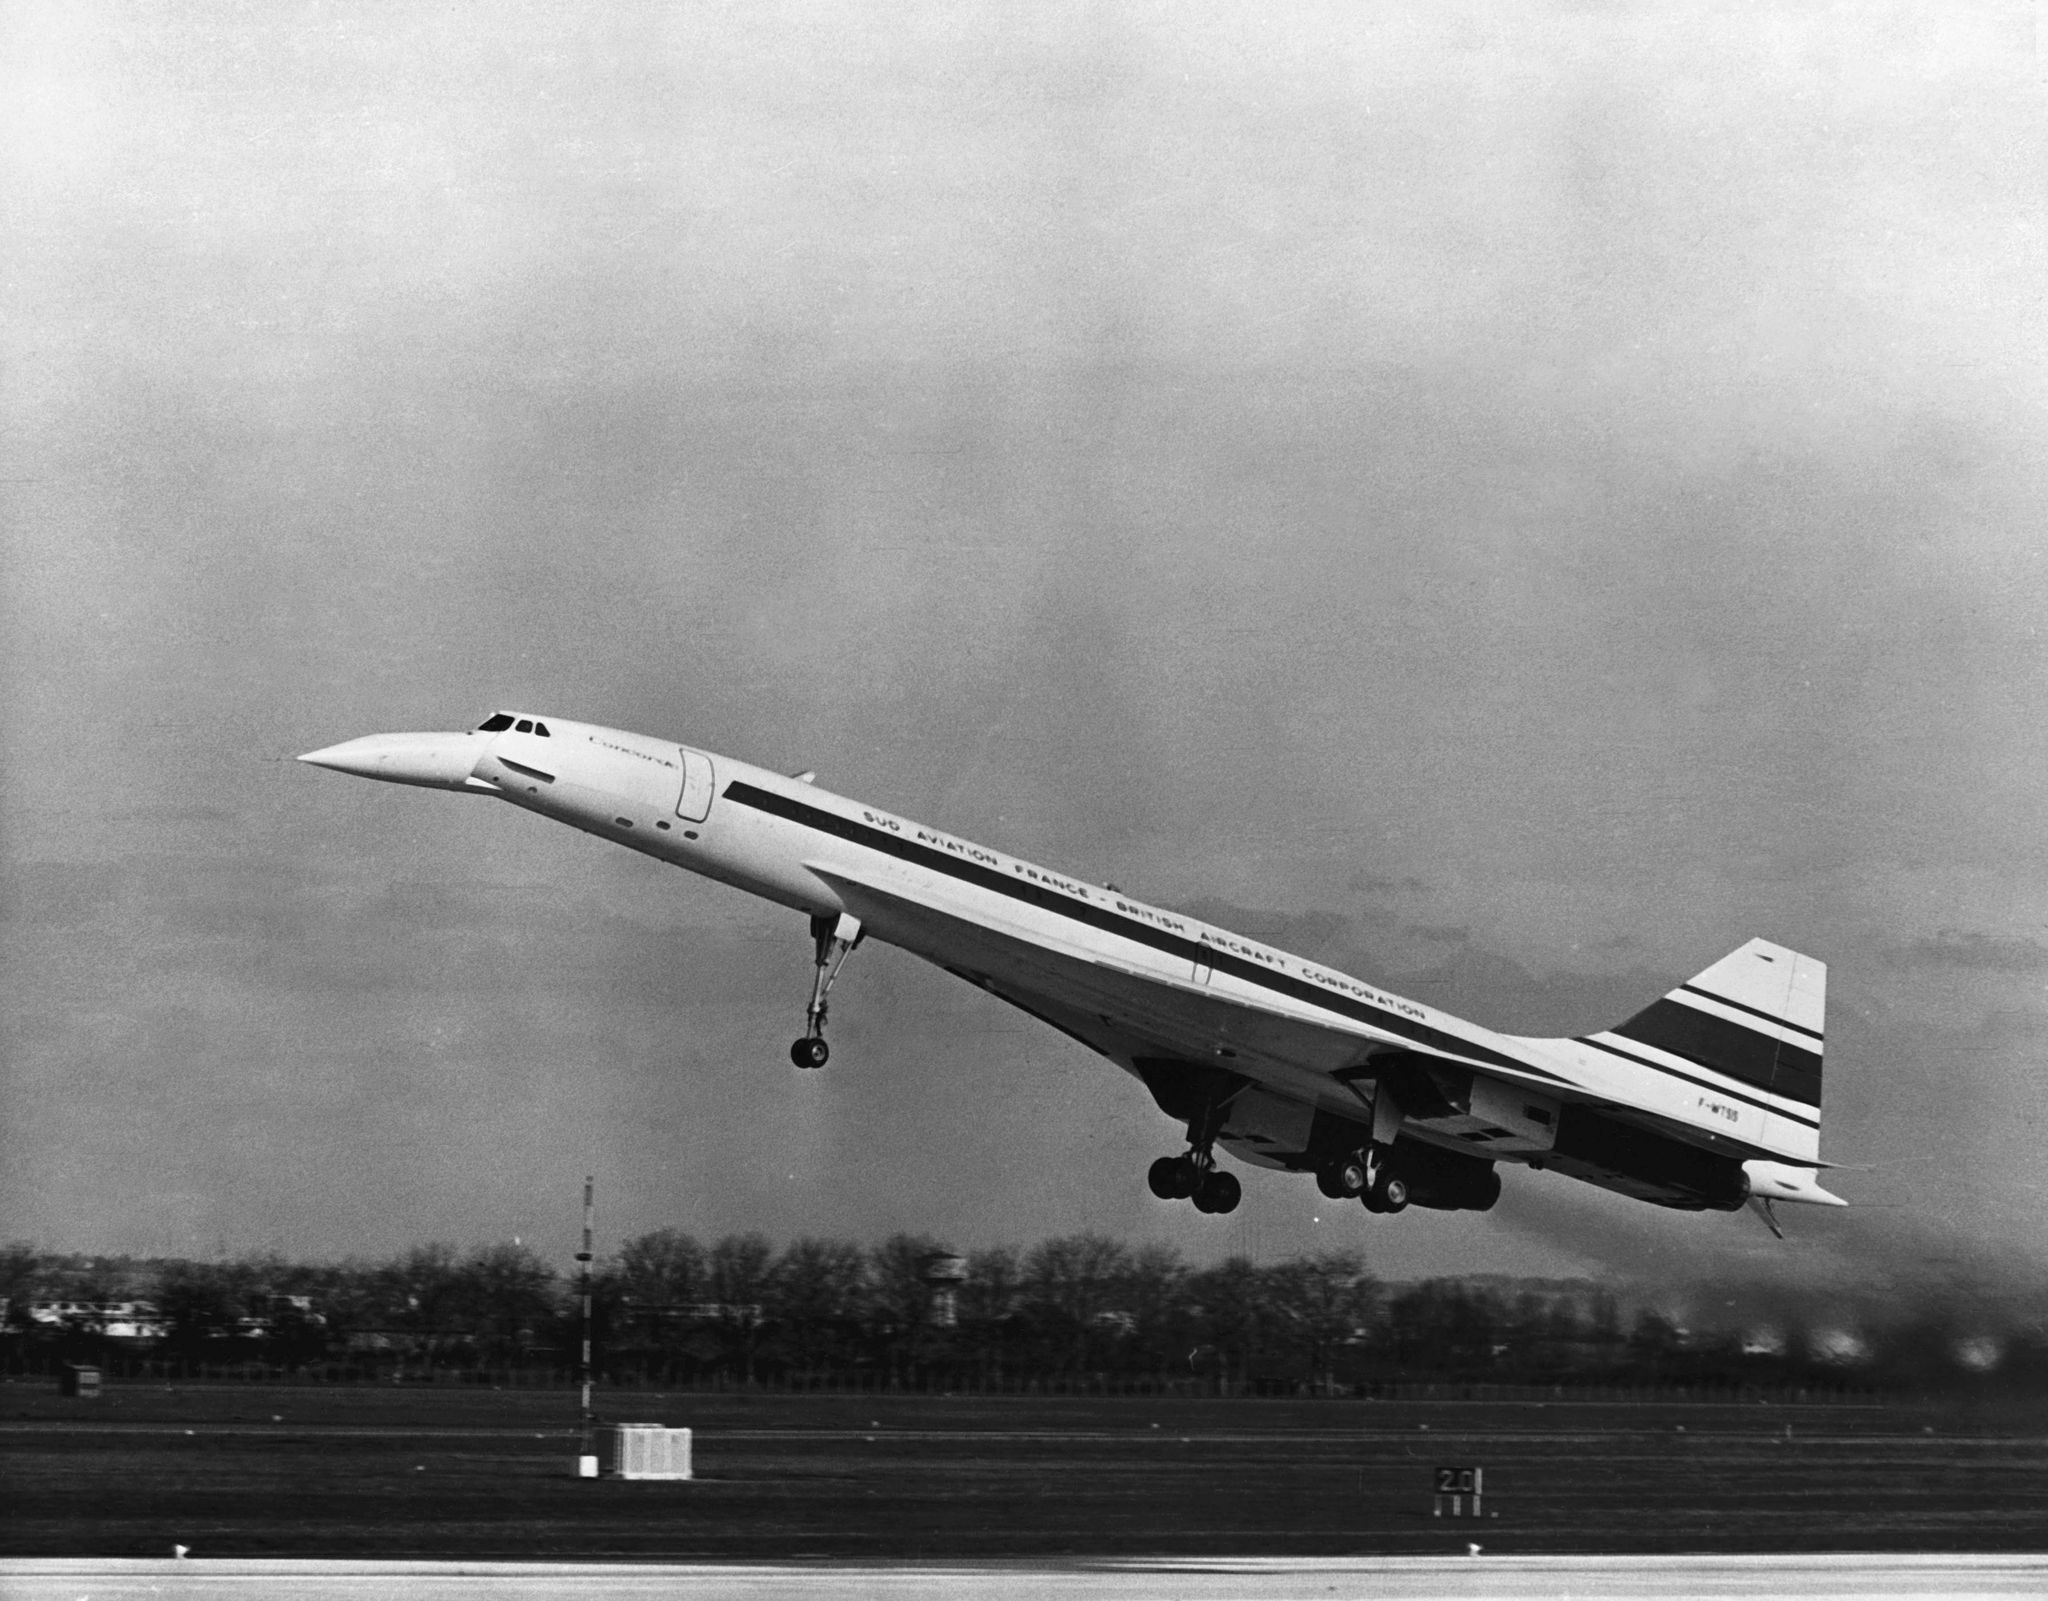 taking off for the first time at 330 pm is concorde 001